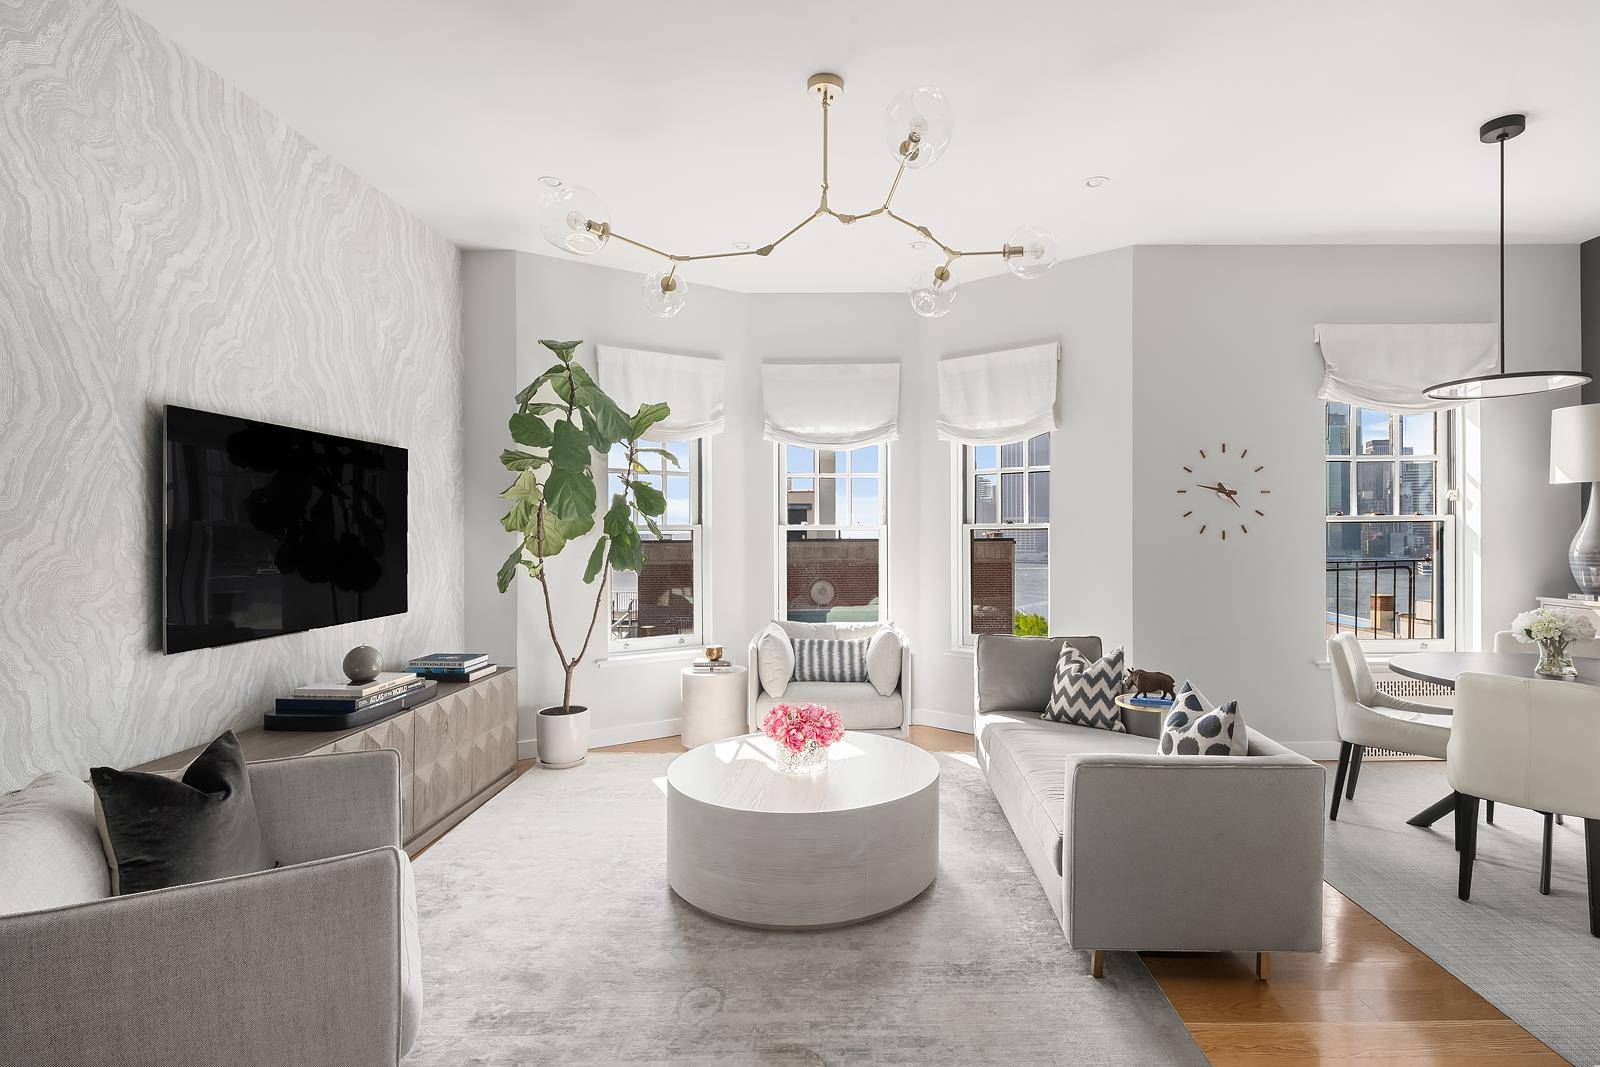 For the first time, this Penthouse Residence on the most coveted block in Brooklyn Heights has come to market.